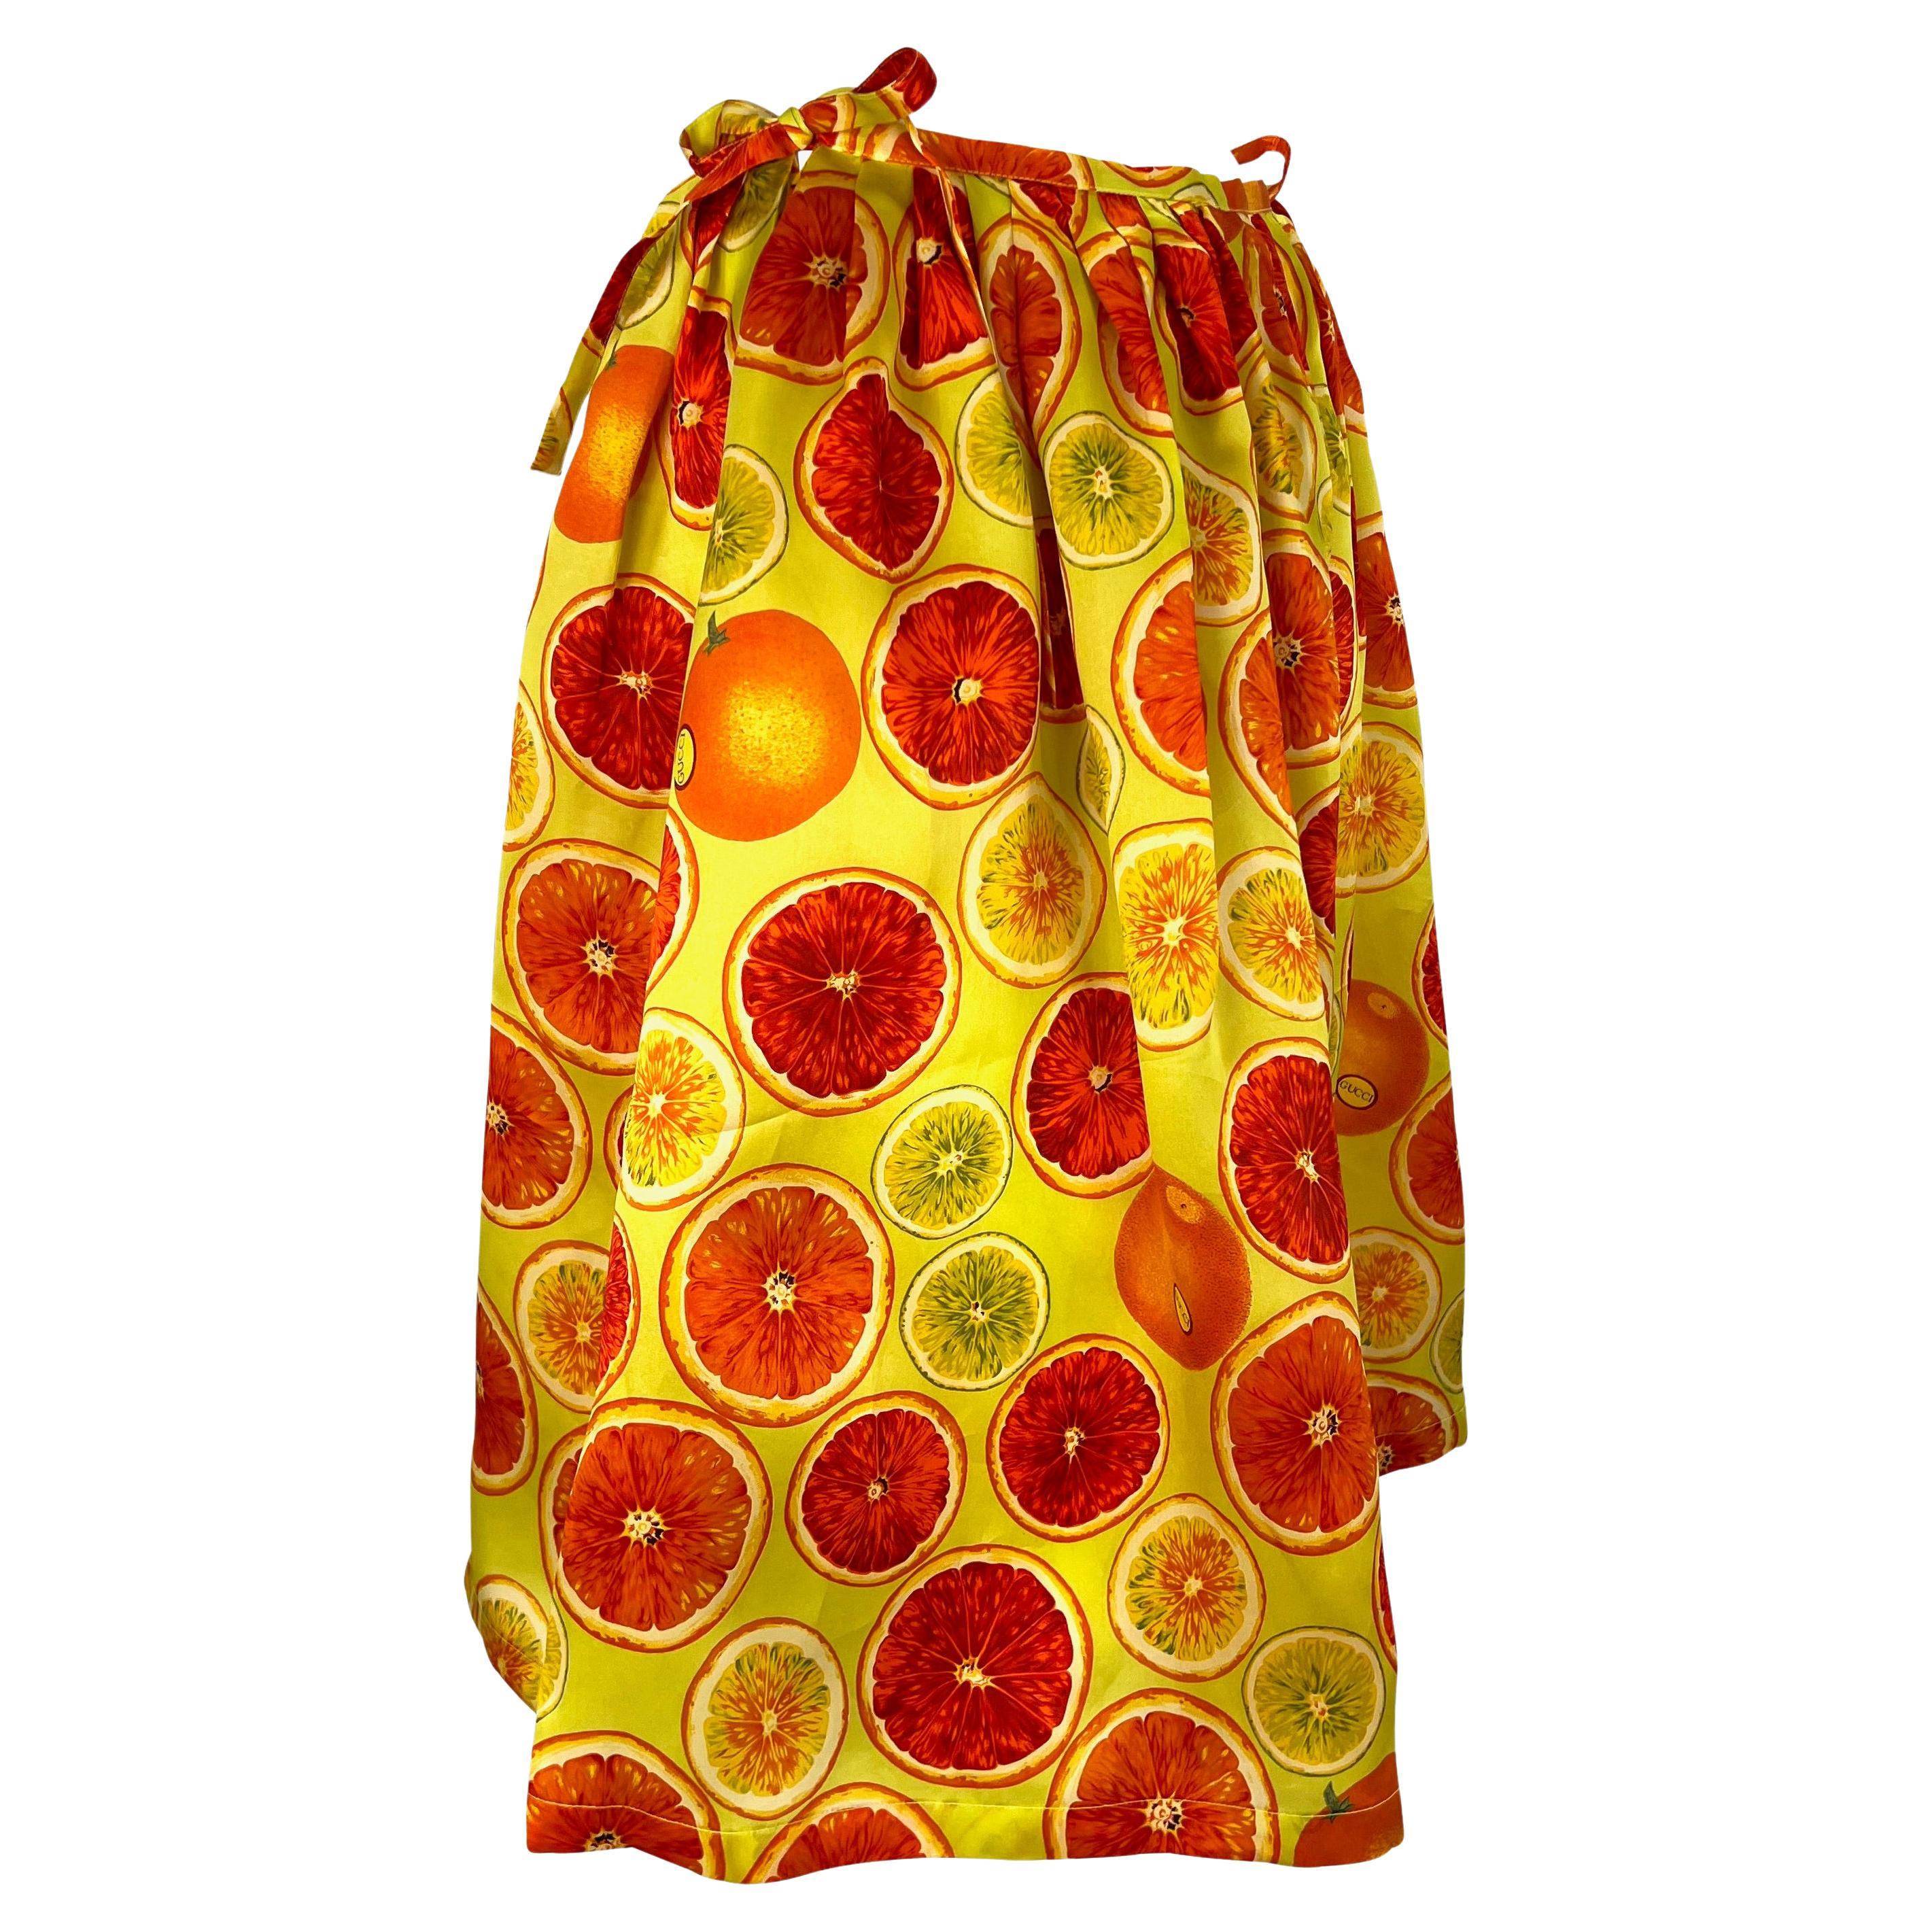 S/S 1995 Gucci by Tom Ford 1st Runway Citrus Fruit Print Silk Balloon Tie Skirt In Excellent Condition For Sale In West Hollywood, CA